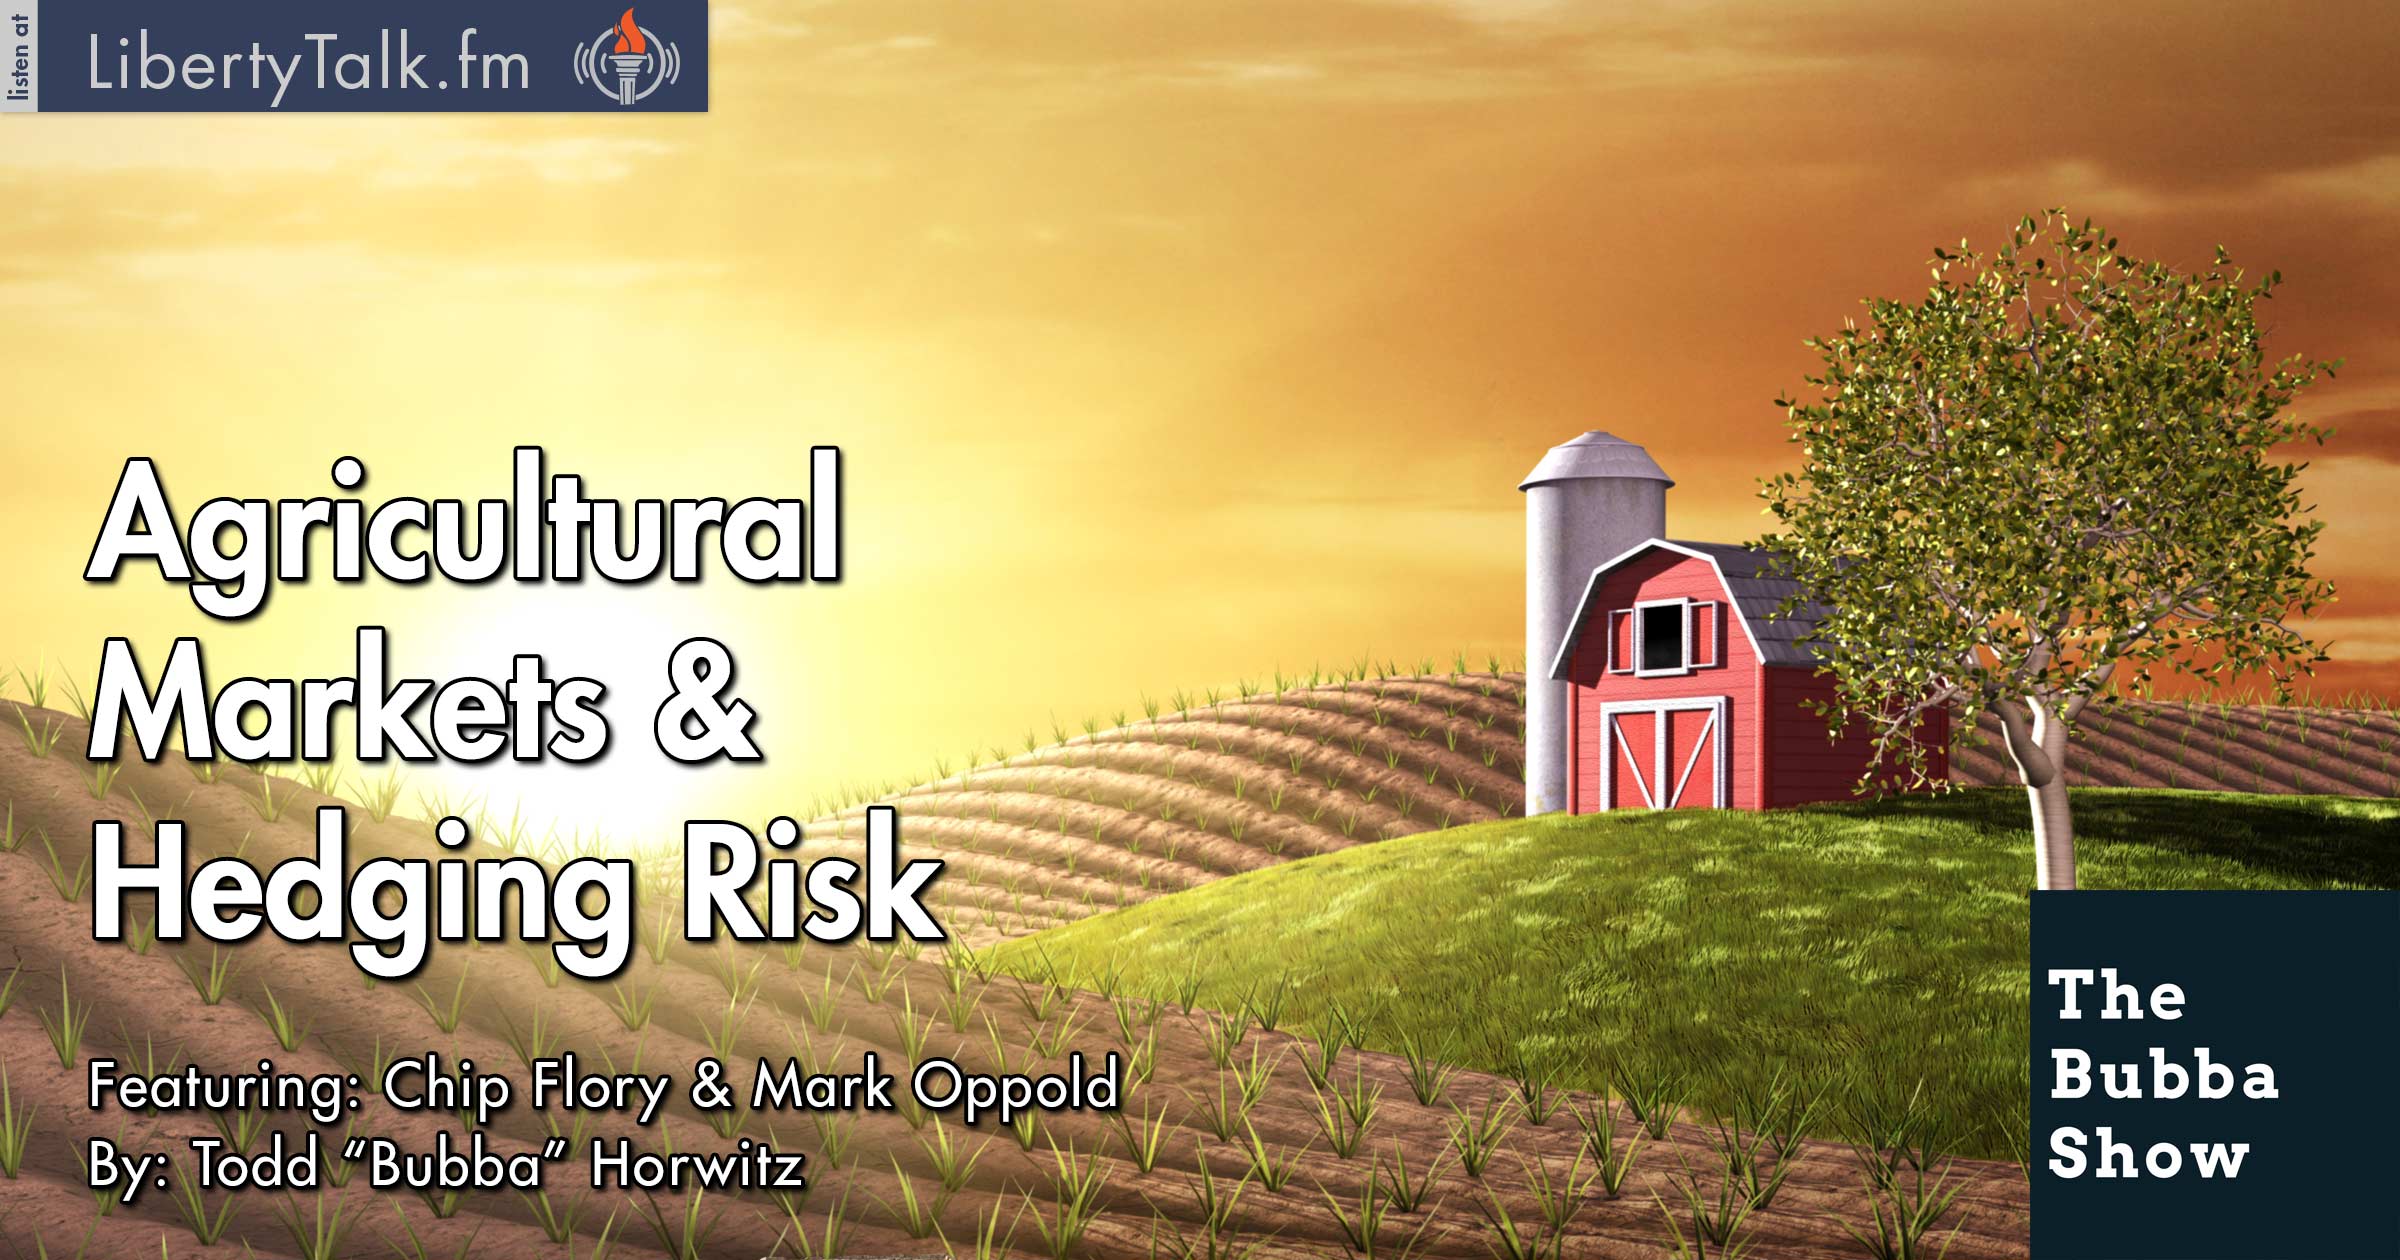 Agricultural Markets & Hedging Risk - The Bubba Show